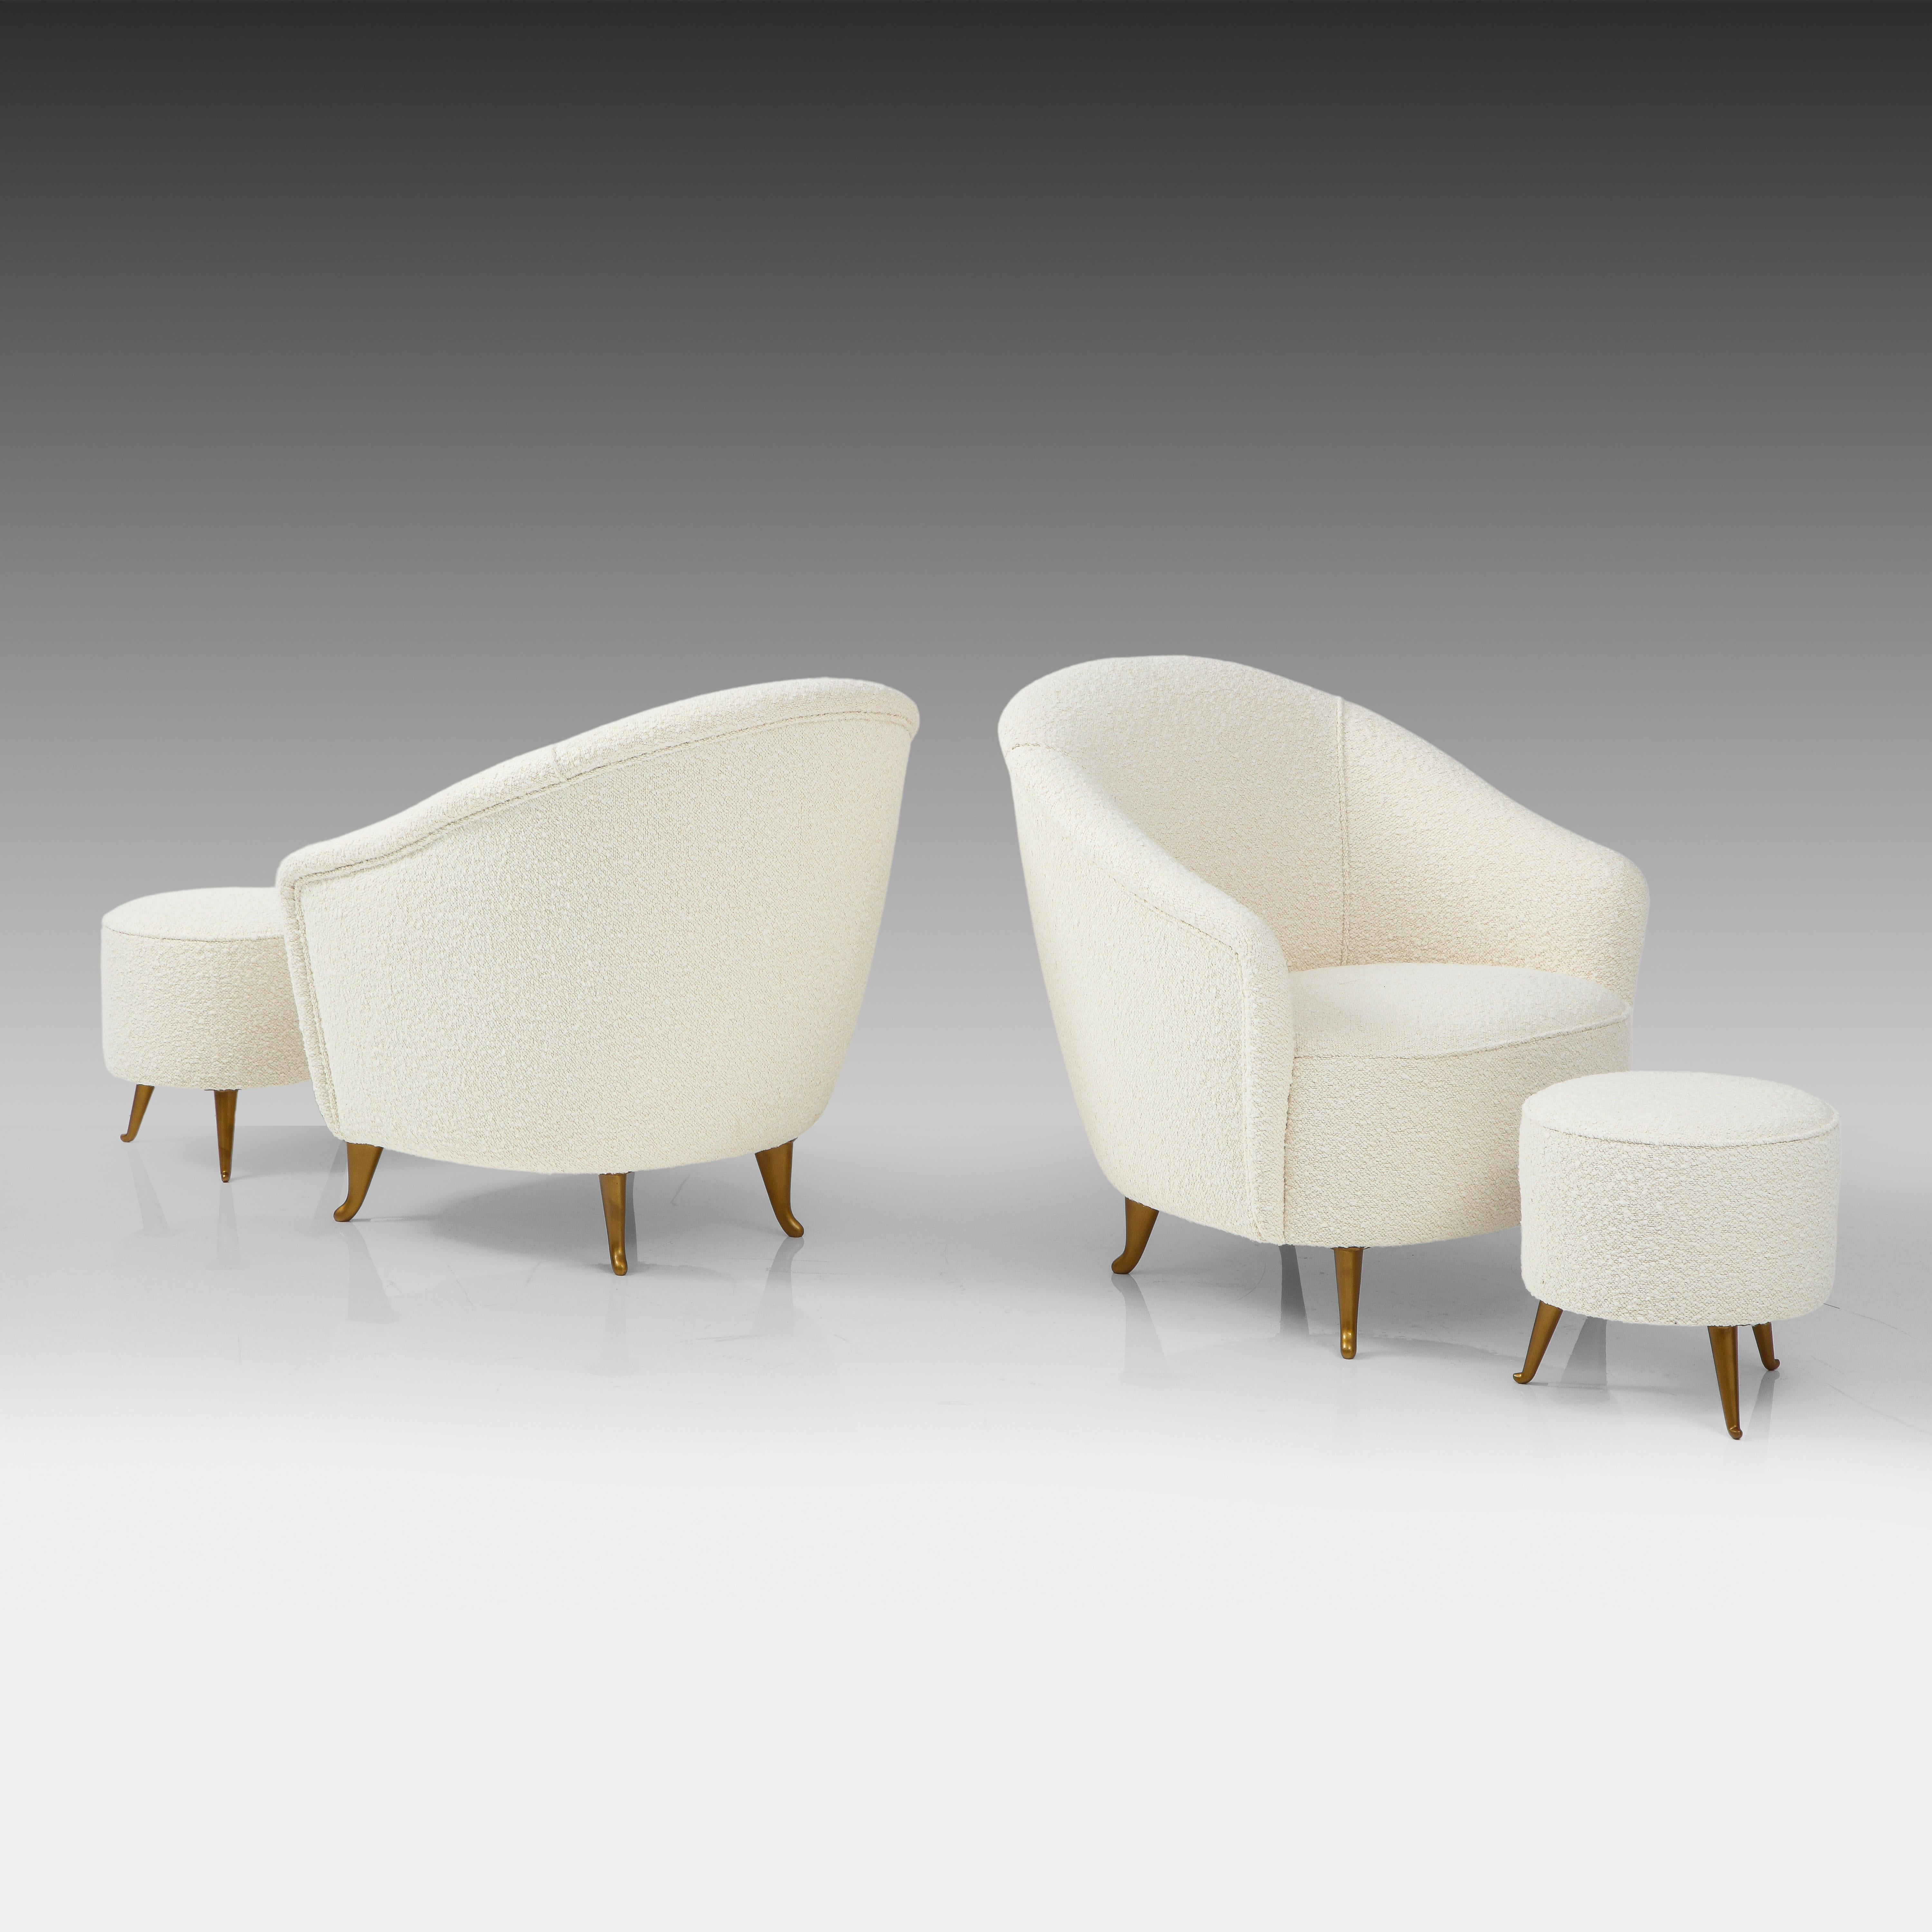 ISA Bergamo rare pair of exquisite armchairs or lounge chairs in white or ivory bouclé with gilt metal legs and matching ottomans, Italy, 1950s. This elegant armchair model exhibits a classical form consisting of gently curved back and beautiful